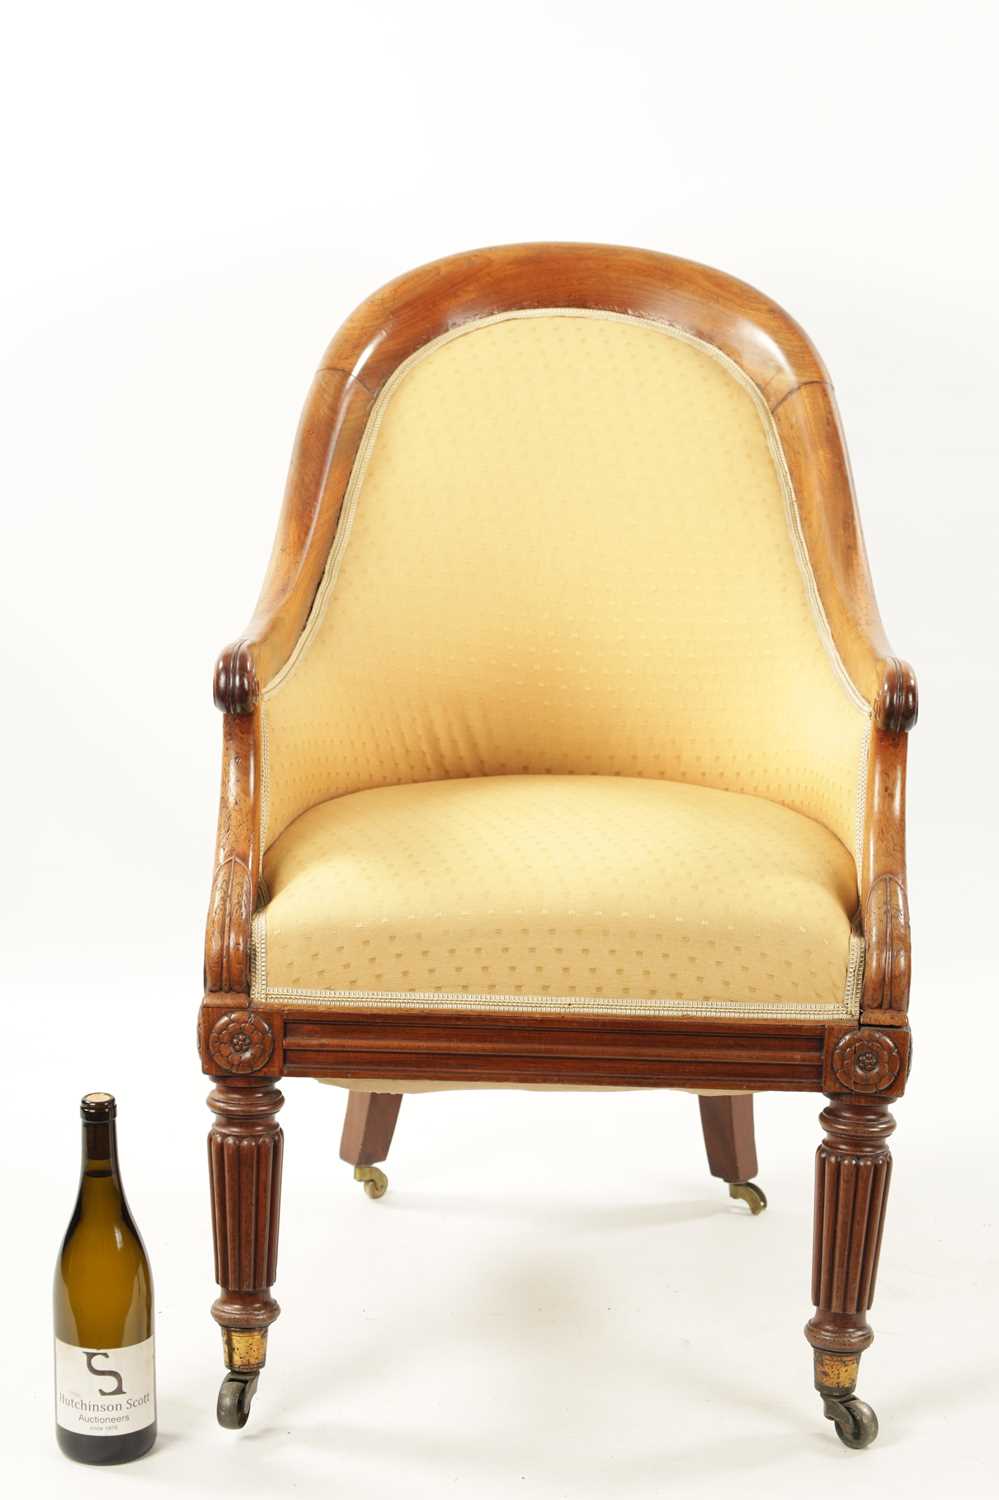 A REGENCY MAHOGANY LIBRARY TUB CHAIR IN THE MANNER OF GILLOWS - Image 5 of 13